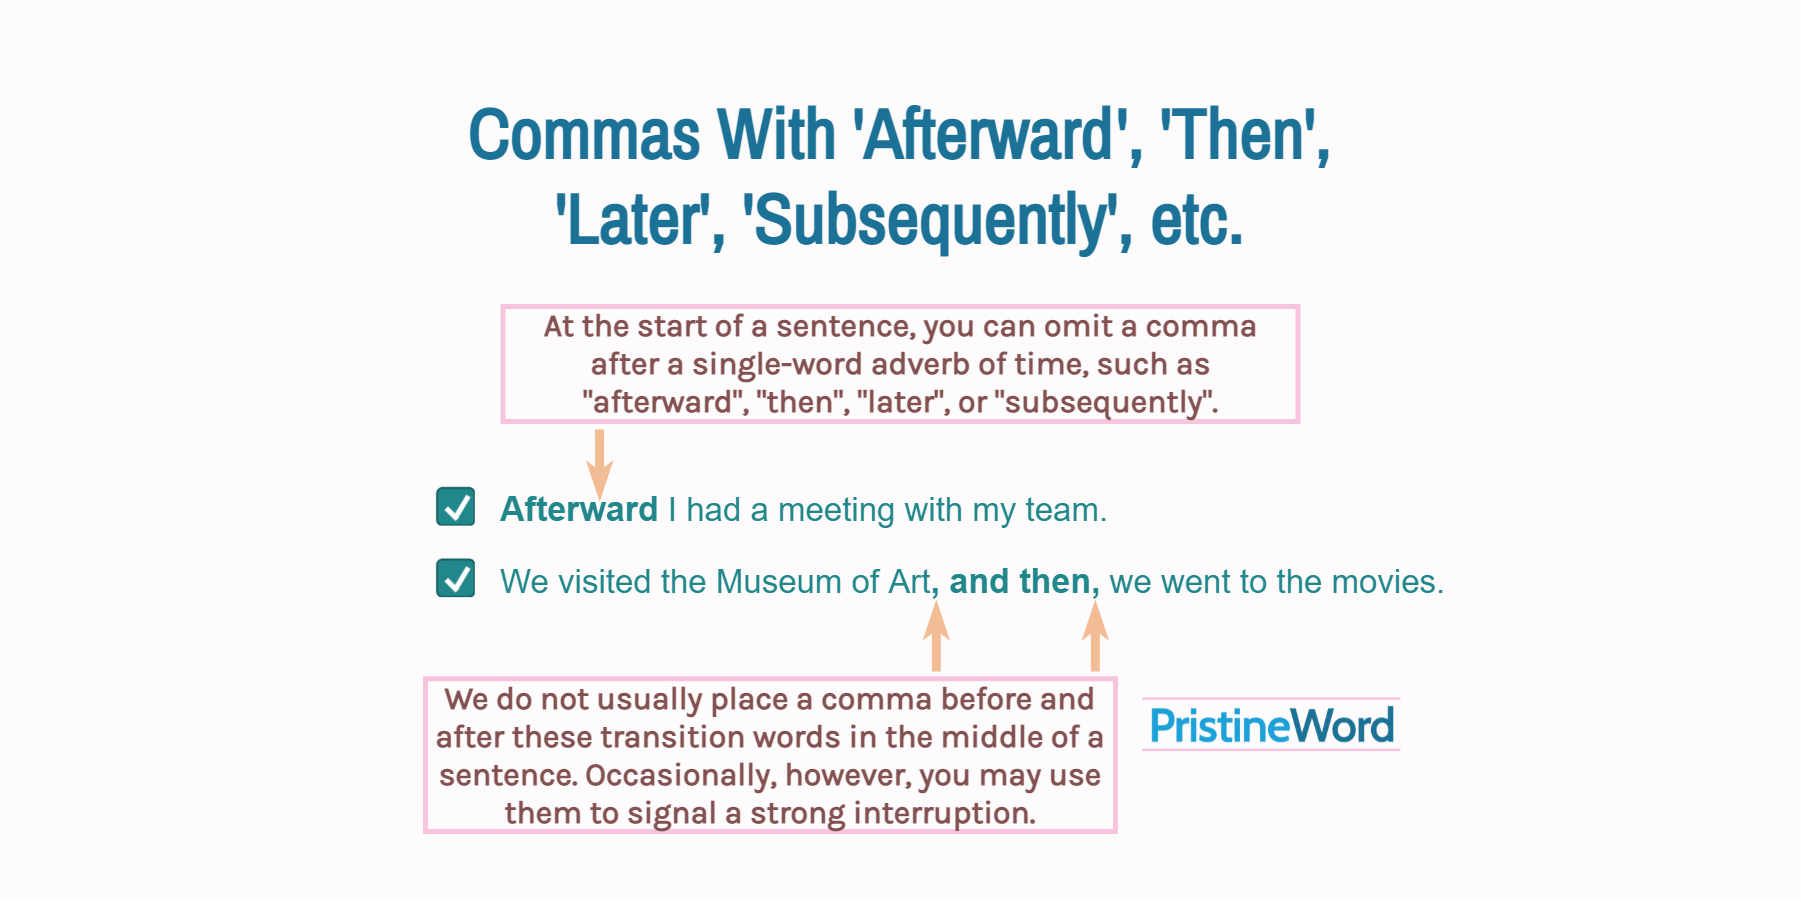 Commas With 'Afterward', 'Then', 'Later', and 'Subsequently'